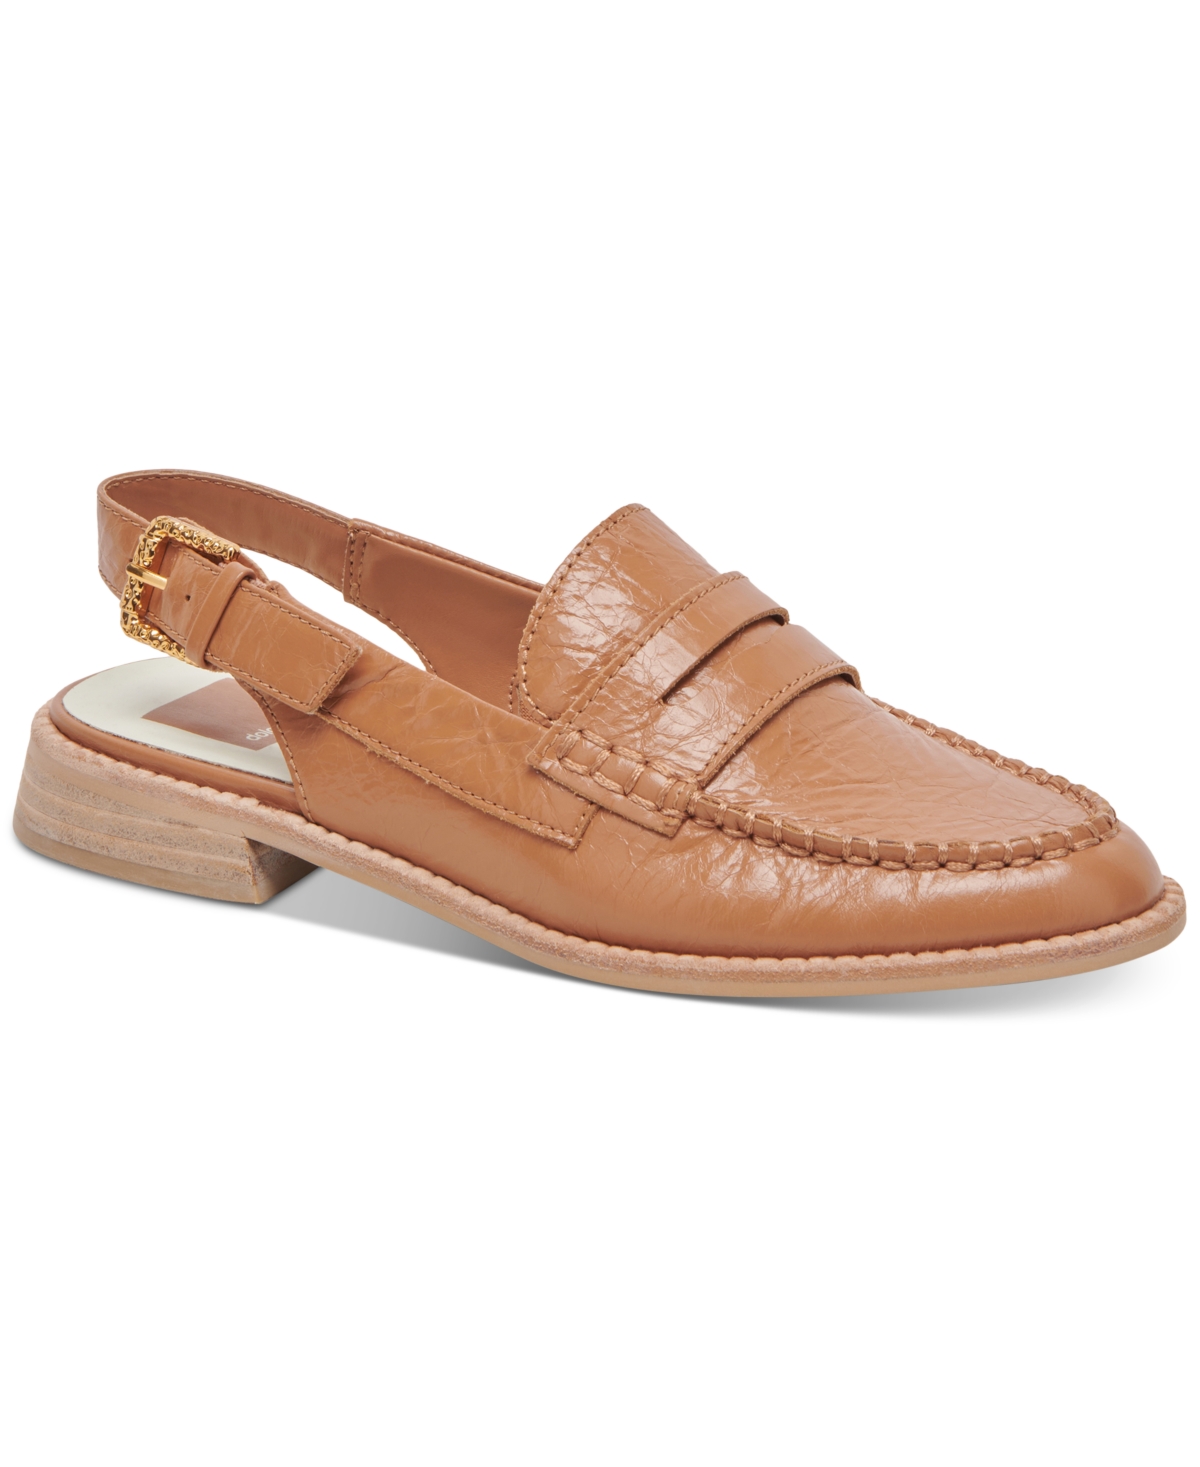 Dolce Vita Women's Hardi Tailored Slingback Loafers In Tan Crinkle Patent Leather